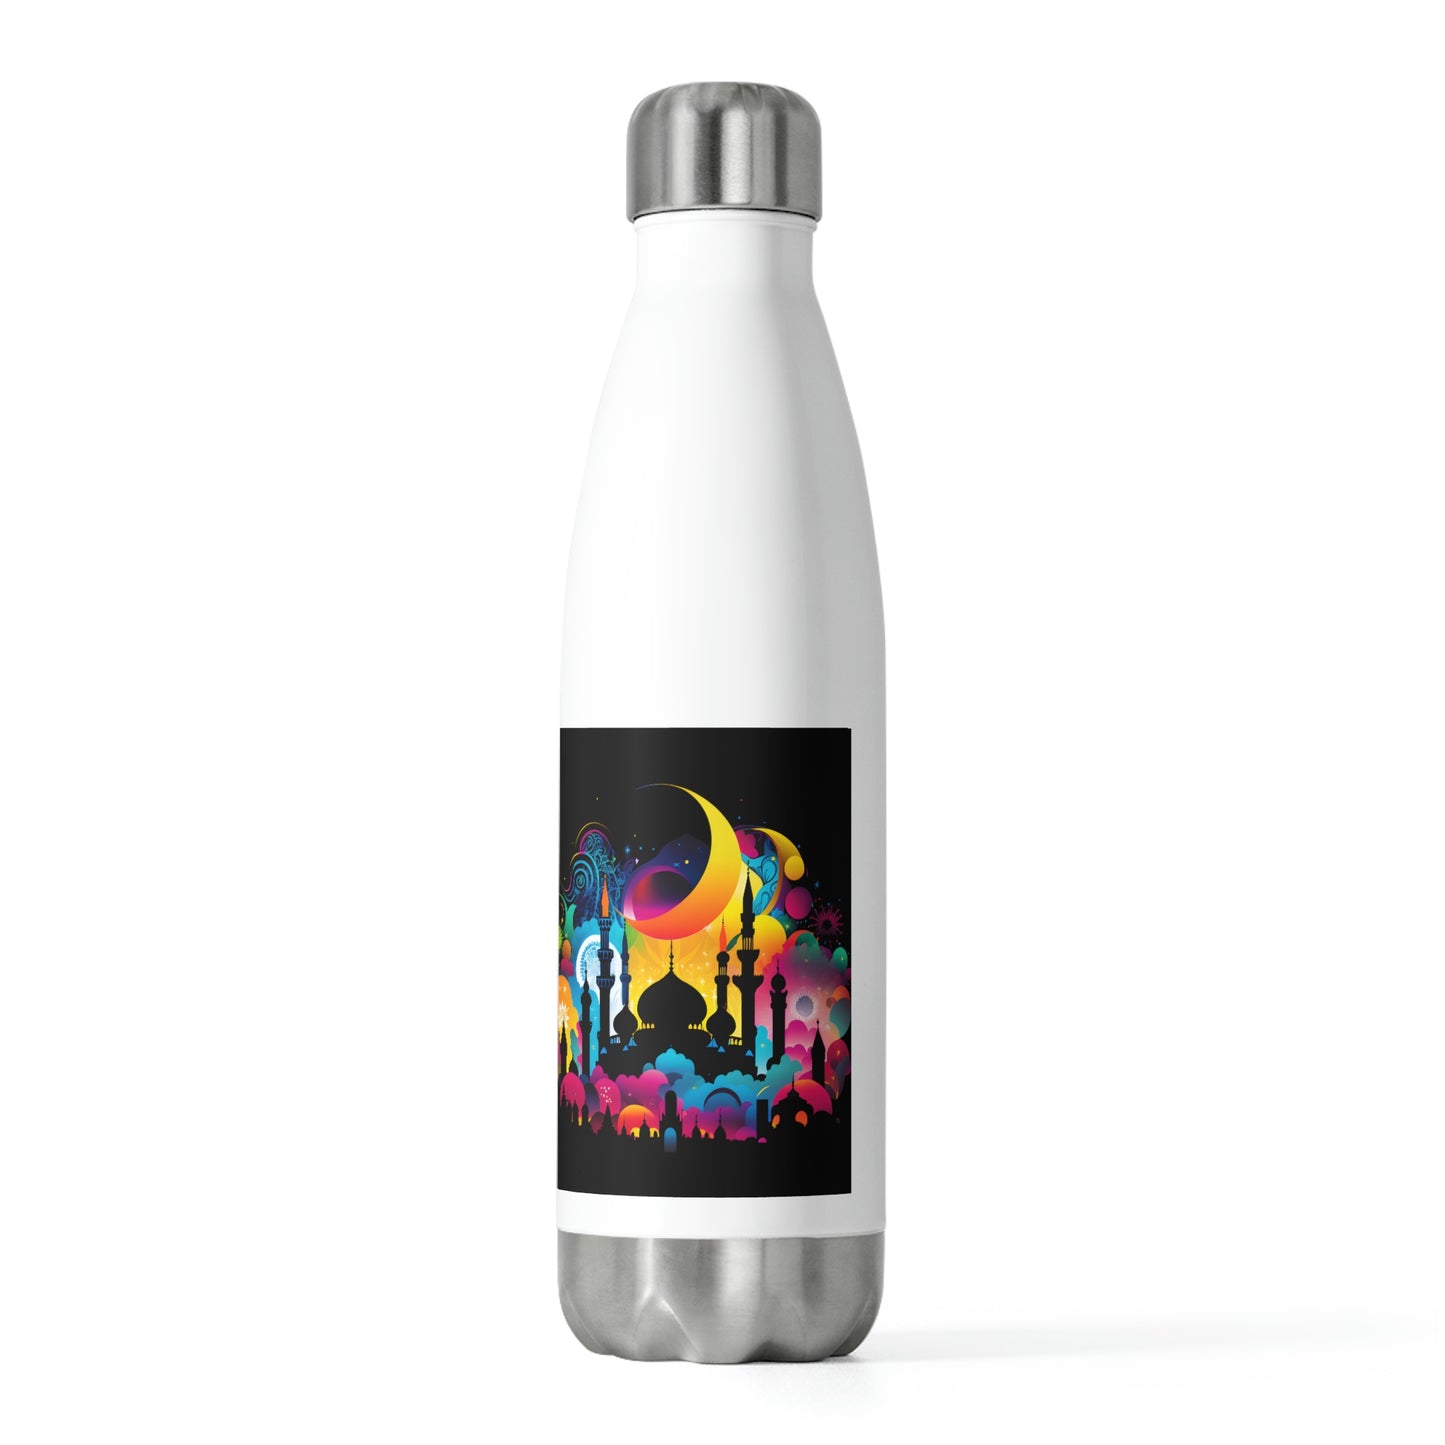 Islamic Theme 20oz Water bottle, Stainless Steel, Screw-on stainless steel top and silicone seal - 20oz Insulated Bottle